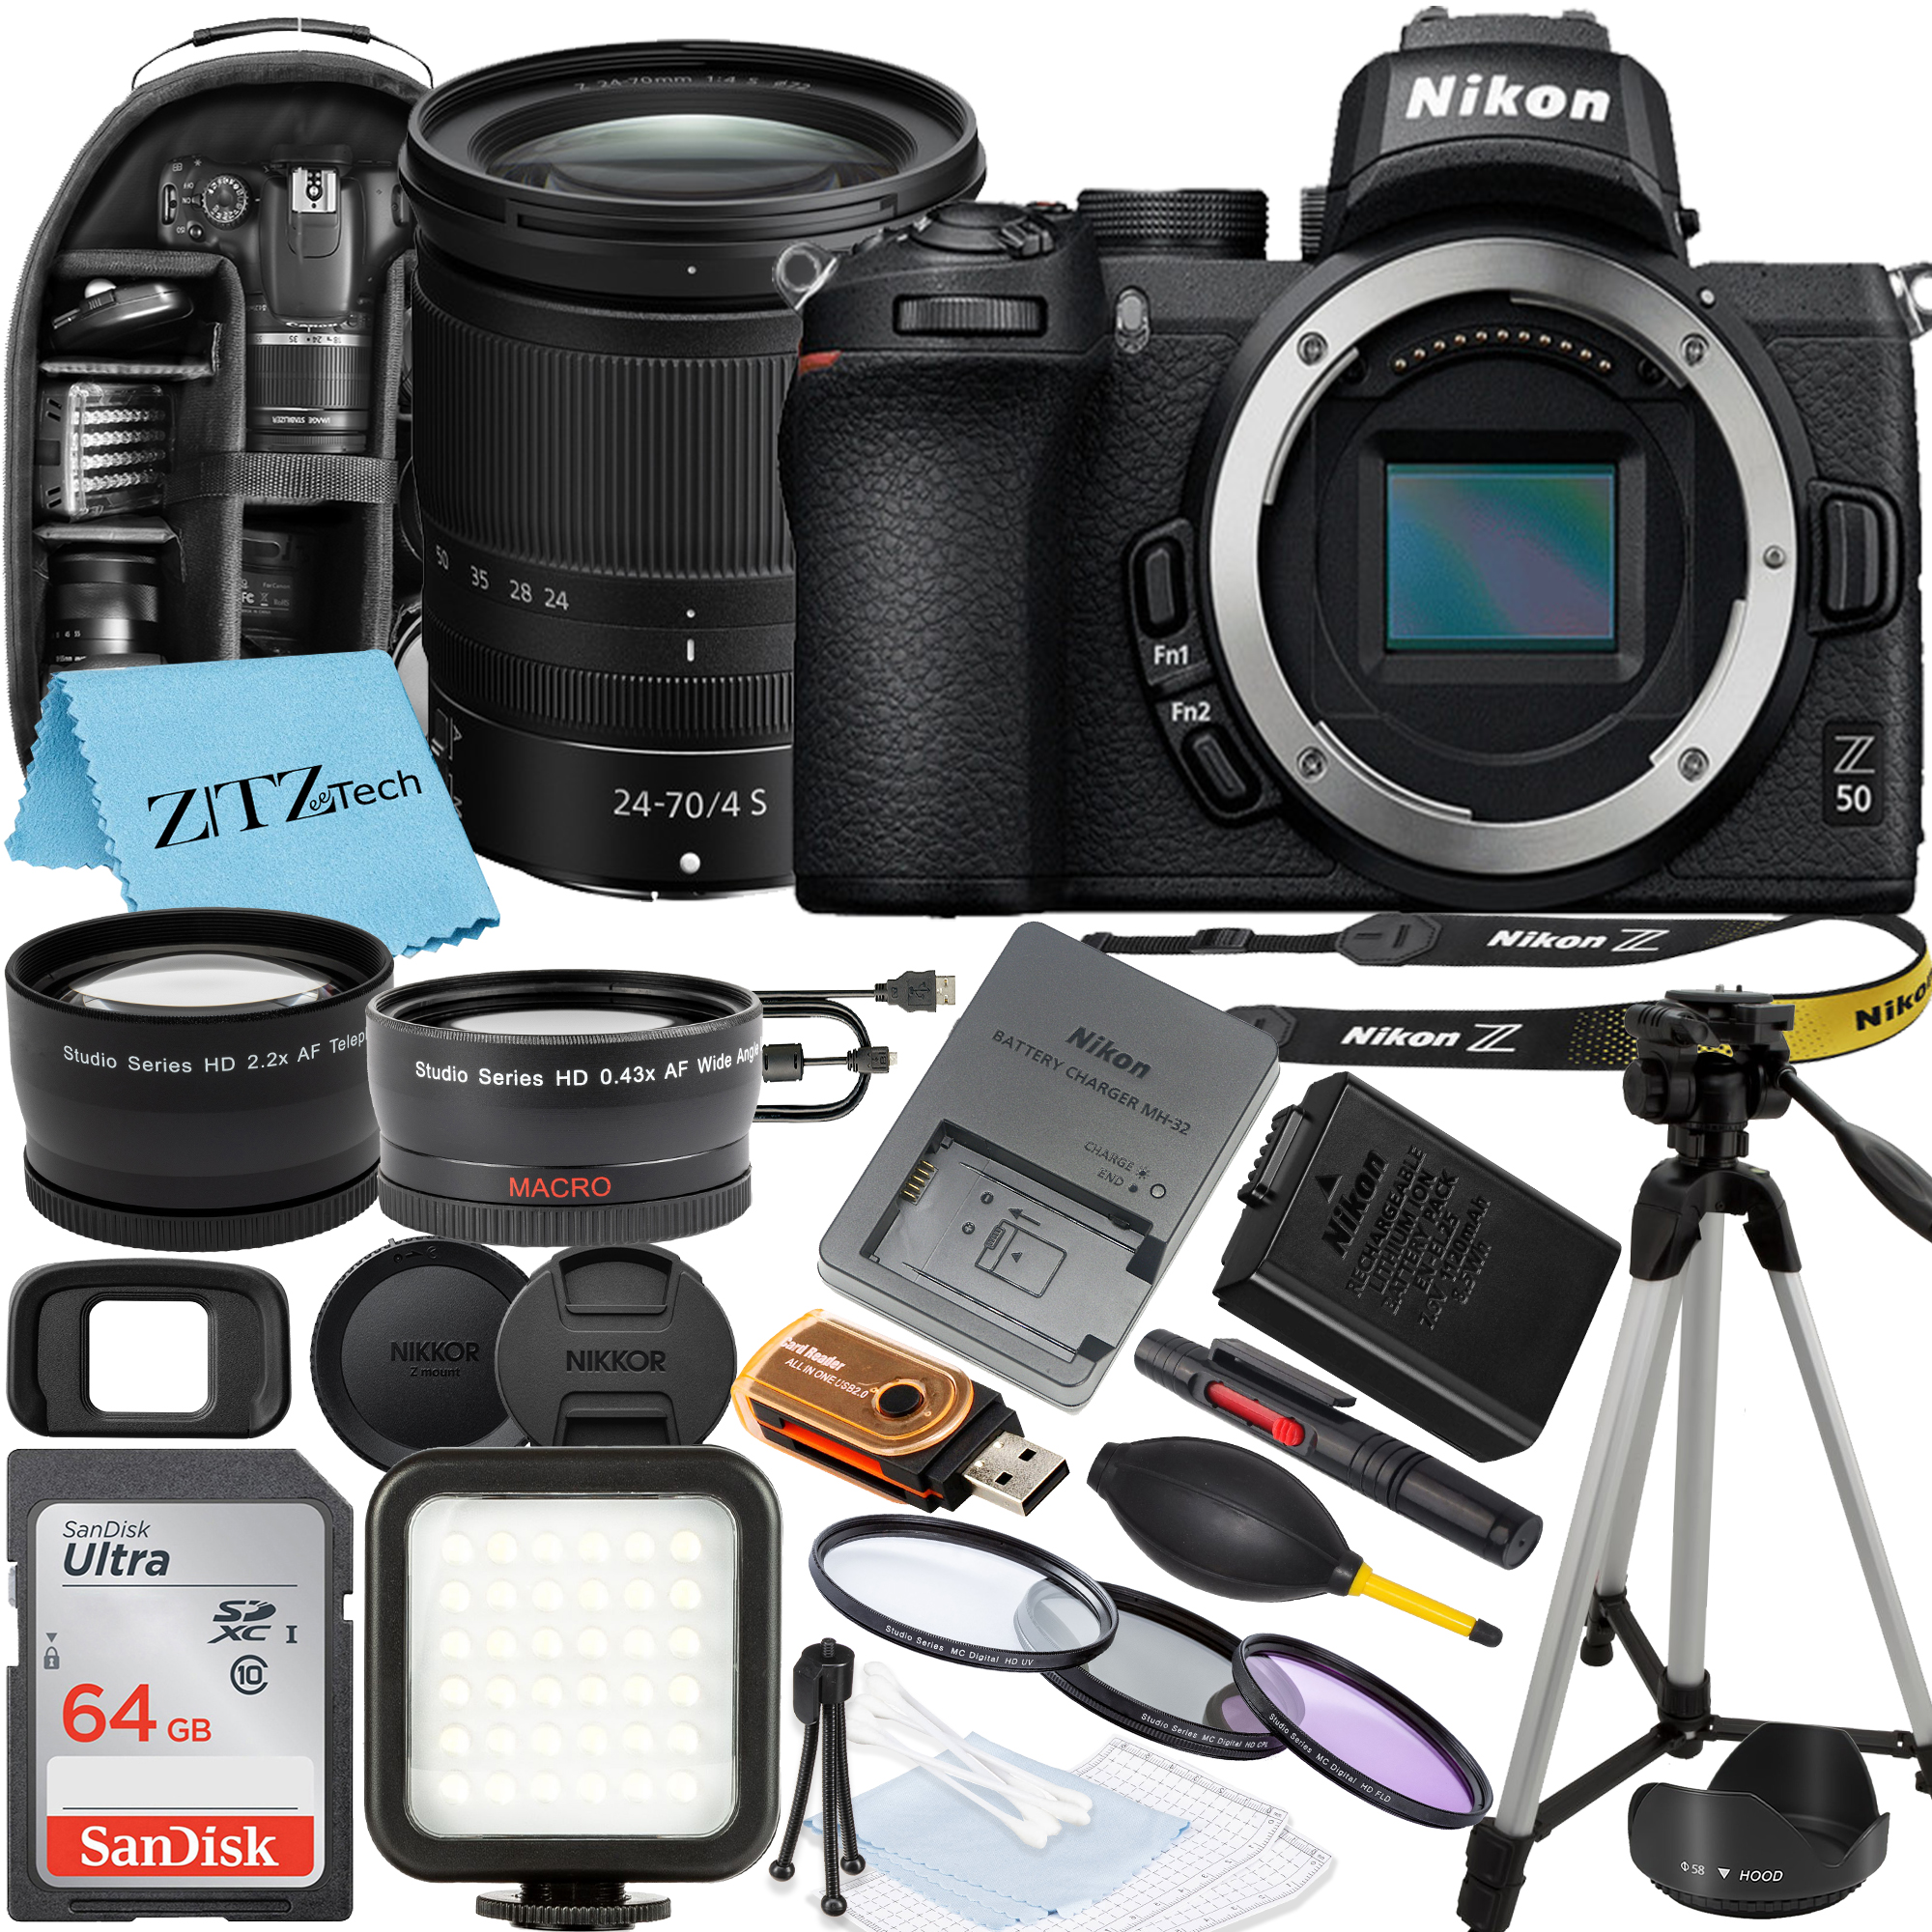 Nikon Z50 Mirrorless Camera with NIKKOR Z 24-70mm f/4 S Lens, SanDisk 64GB Memory Card, Backpack, Flash, Tripod and ZeeTech Accessory Bundle